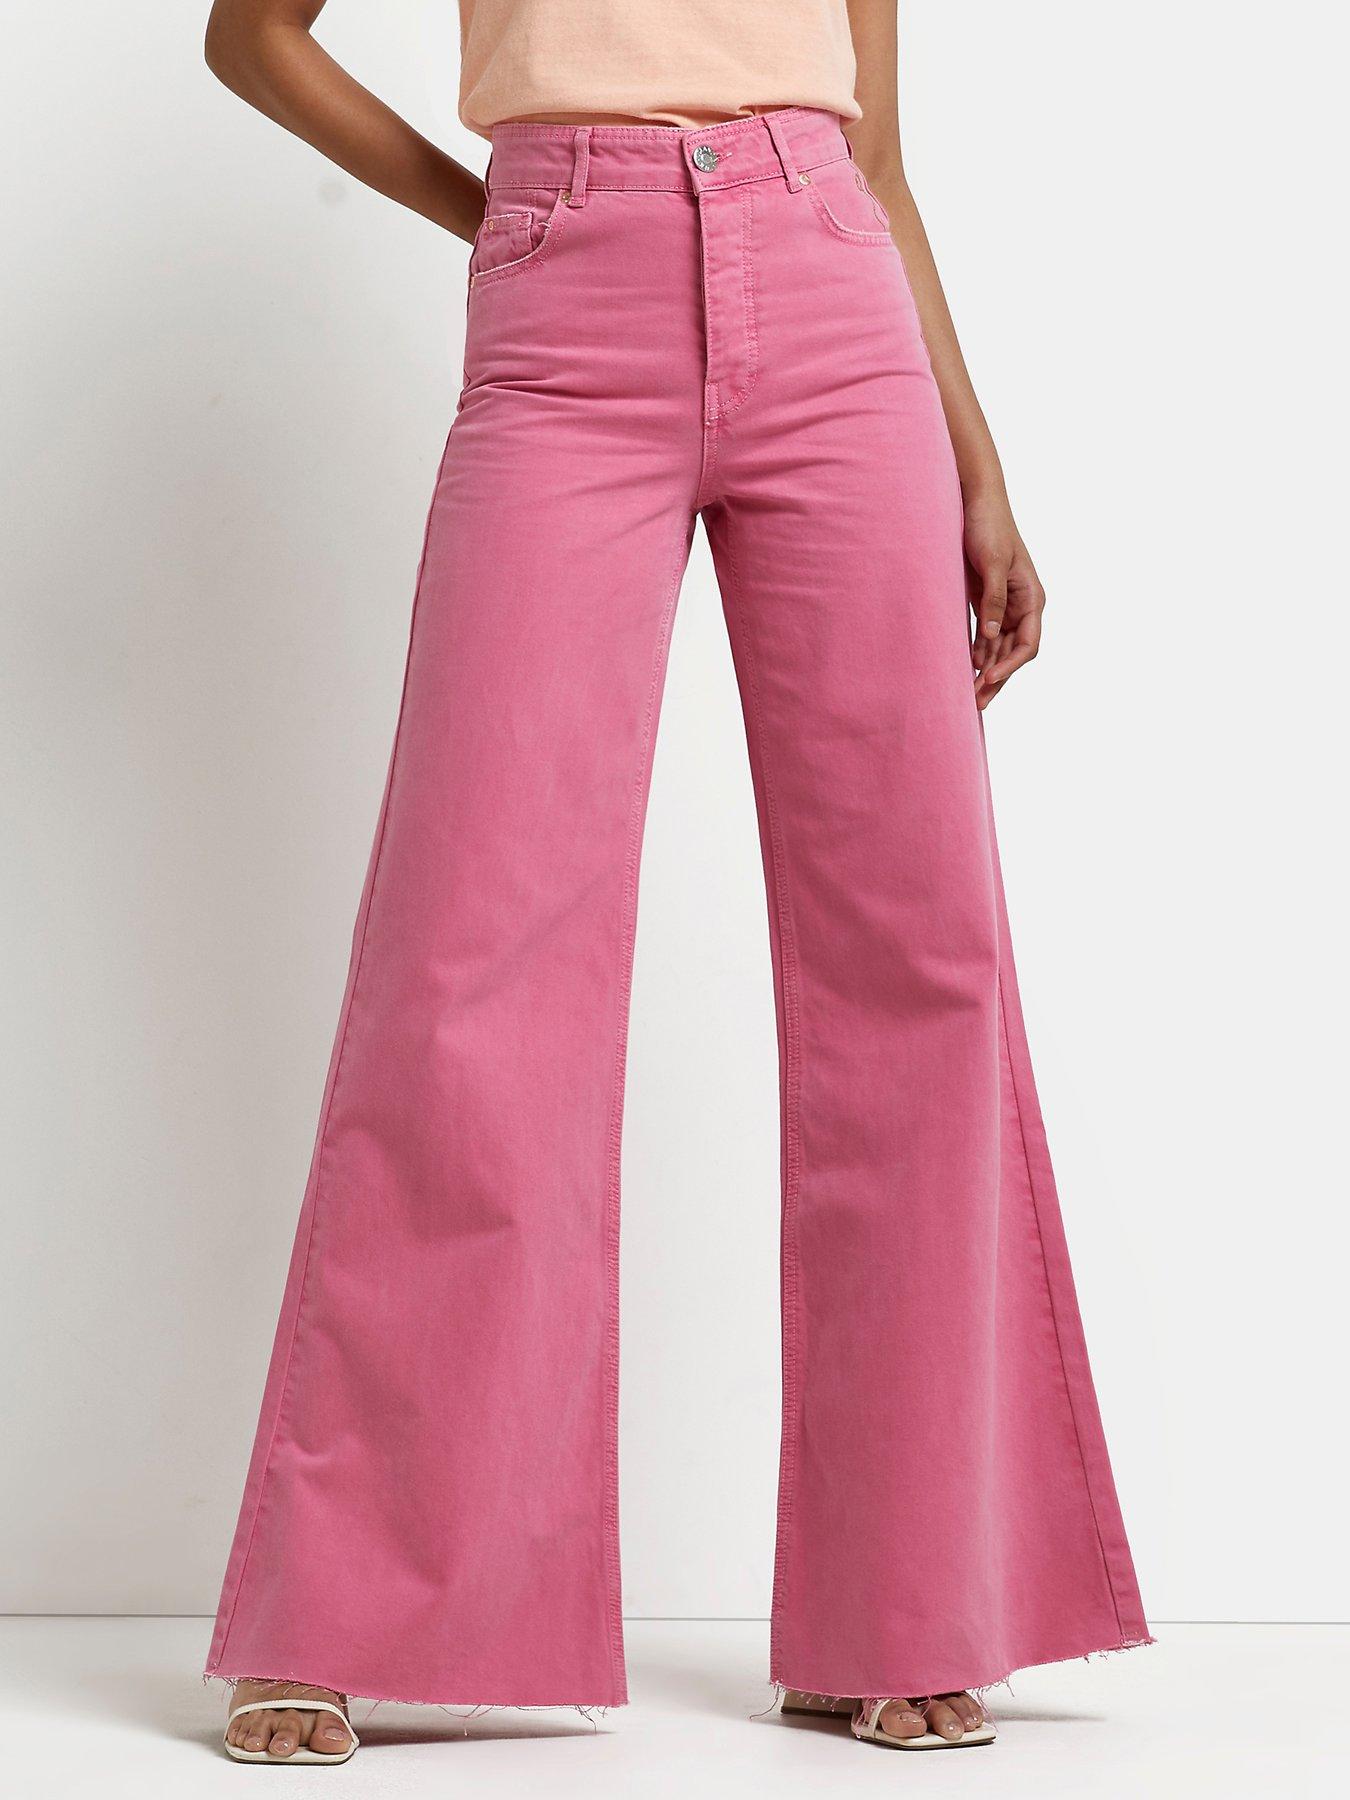 River Island High Waisted Ultra Flared Jeans - Pink | very.co.uk